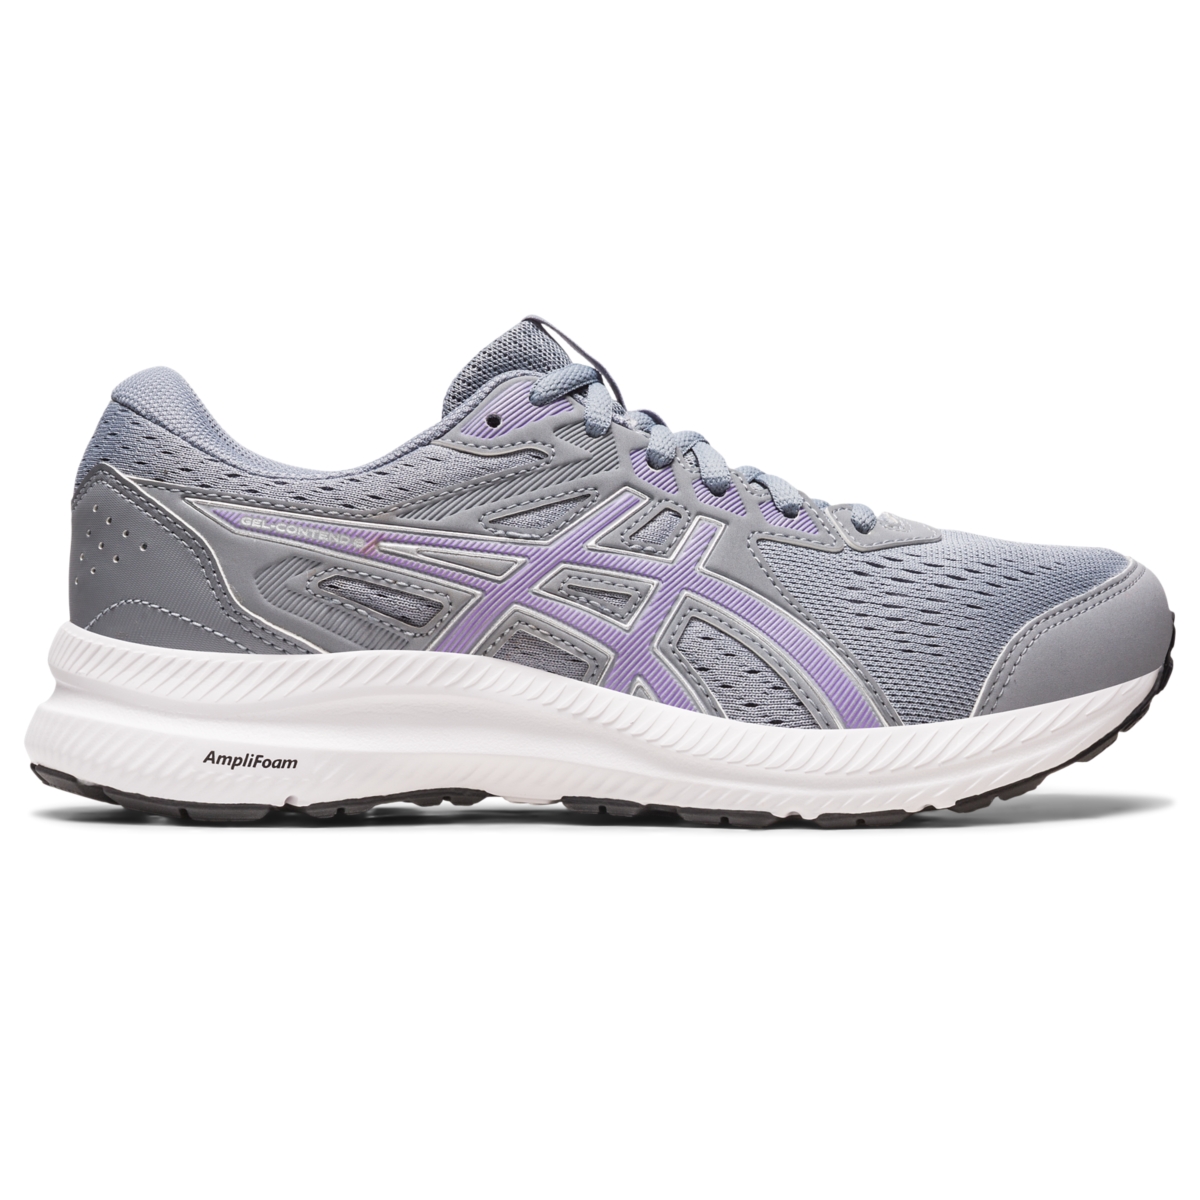 ASICS Gel contend 8. ASICS Gel contend 6. Gel-contend 8 ASICS Color: Rain Forest/White. Gel-contend 8 Piedmont Grey/Frosted Rose. Gel contend 8